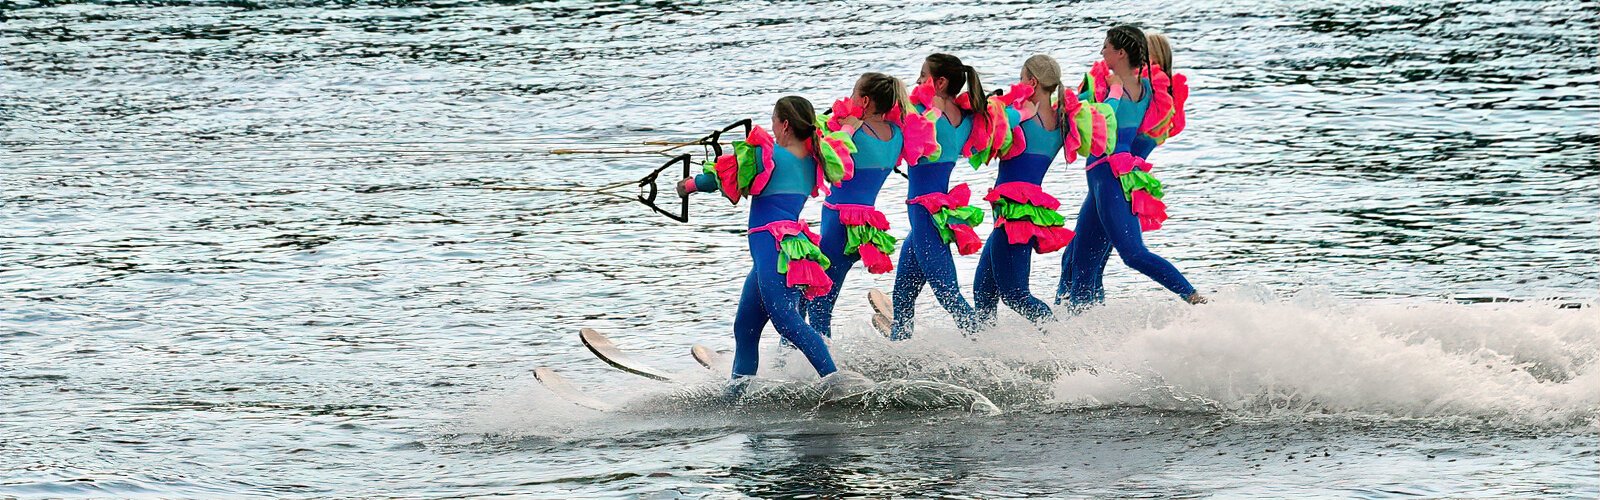 The Tampa Bay Water Ski Show Team is a competitive team that puts on themed water ski shows to entertain spectators.